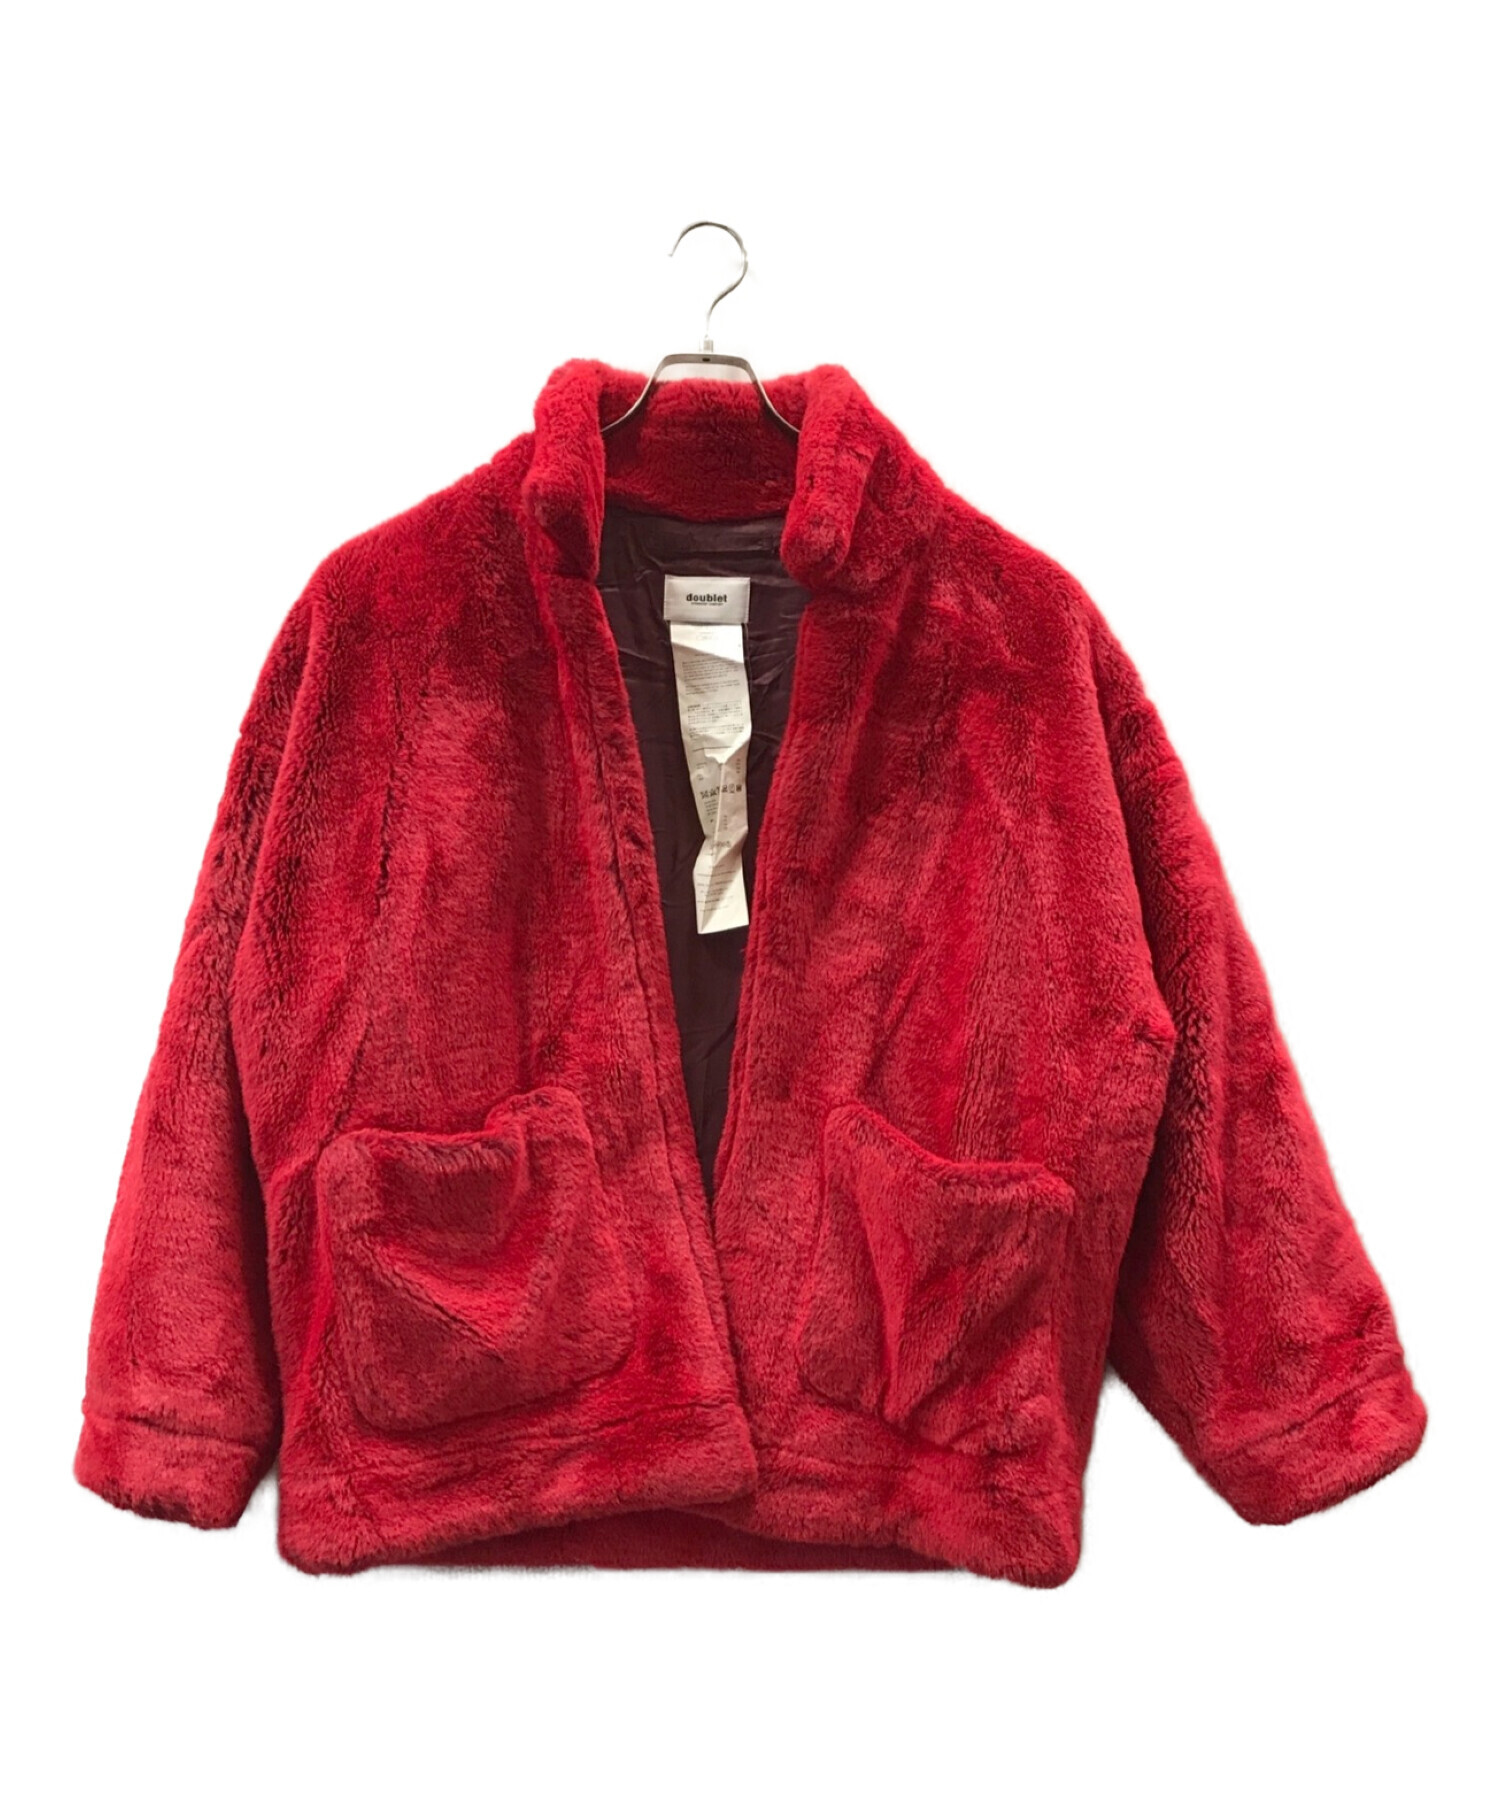 doublet (ダブレット) 19AW HAND PAINTED FUR JACKET レッド サイズ:M